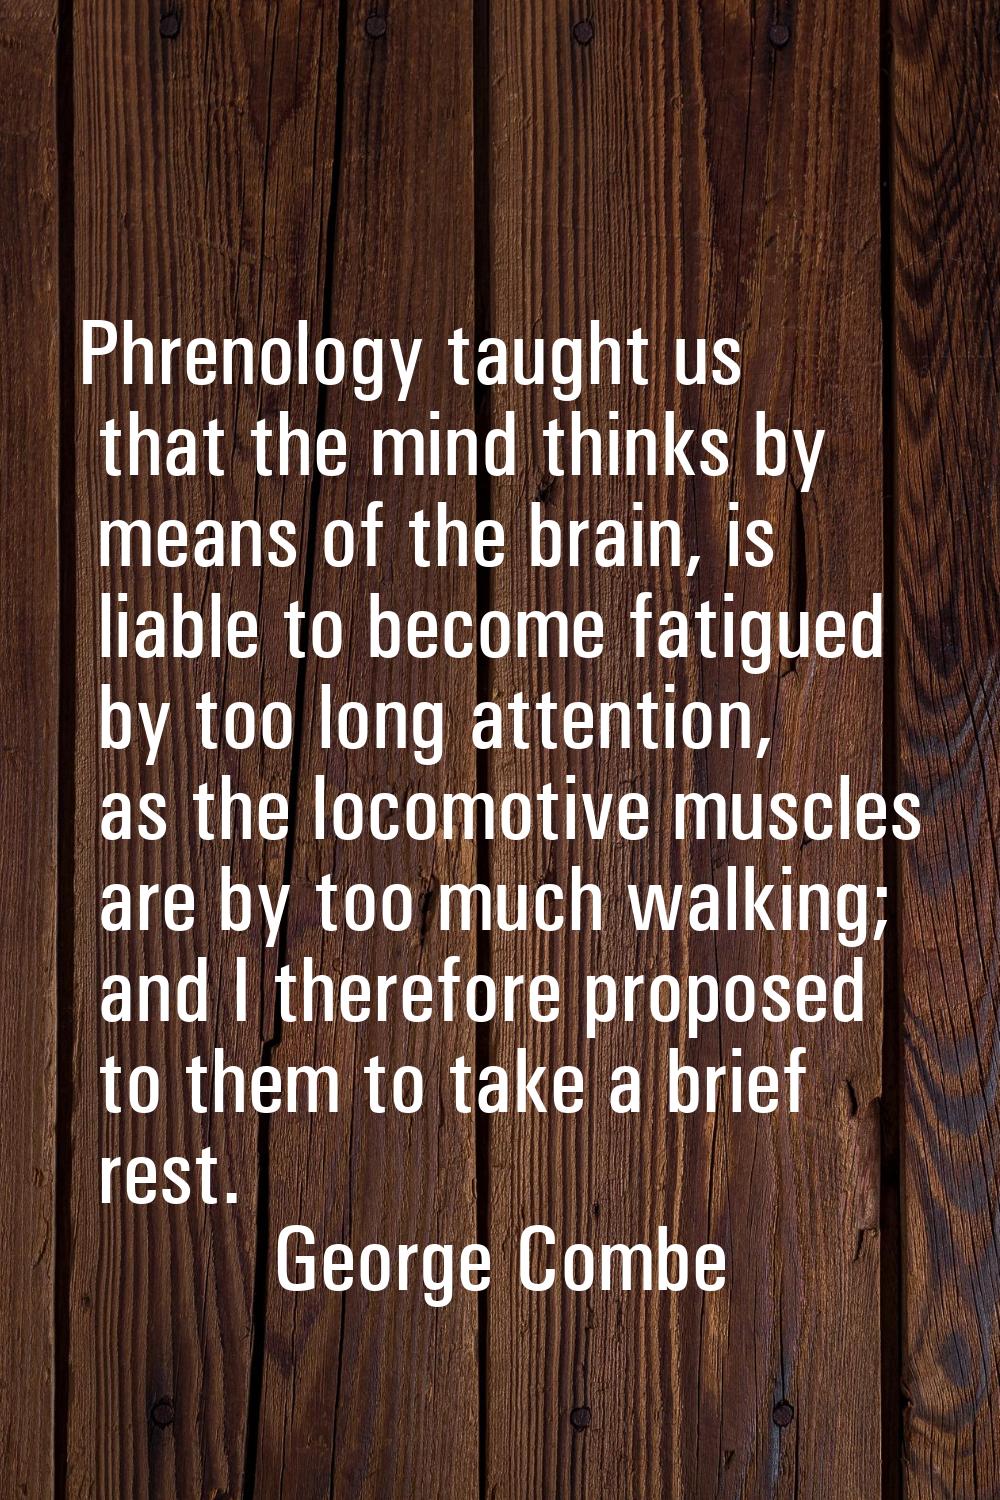 Phrenology taught us that the mind thinks by means of the brain, is liable to become fatigued by to